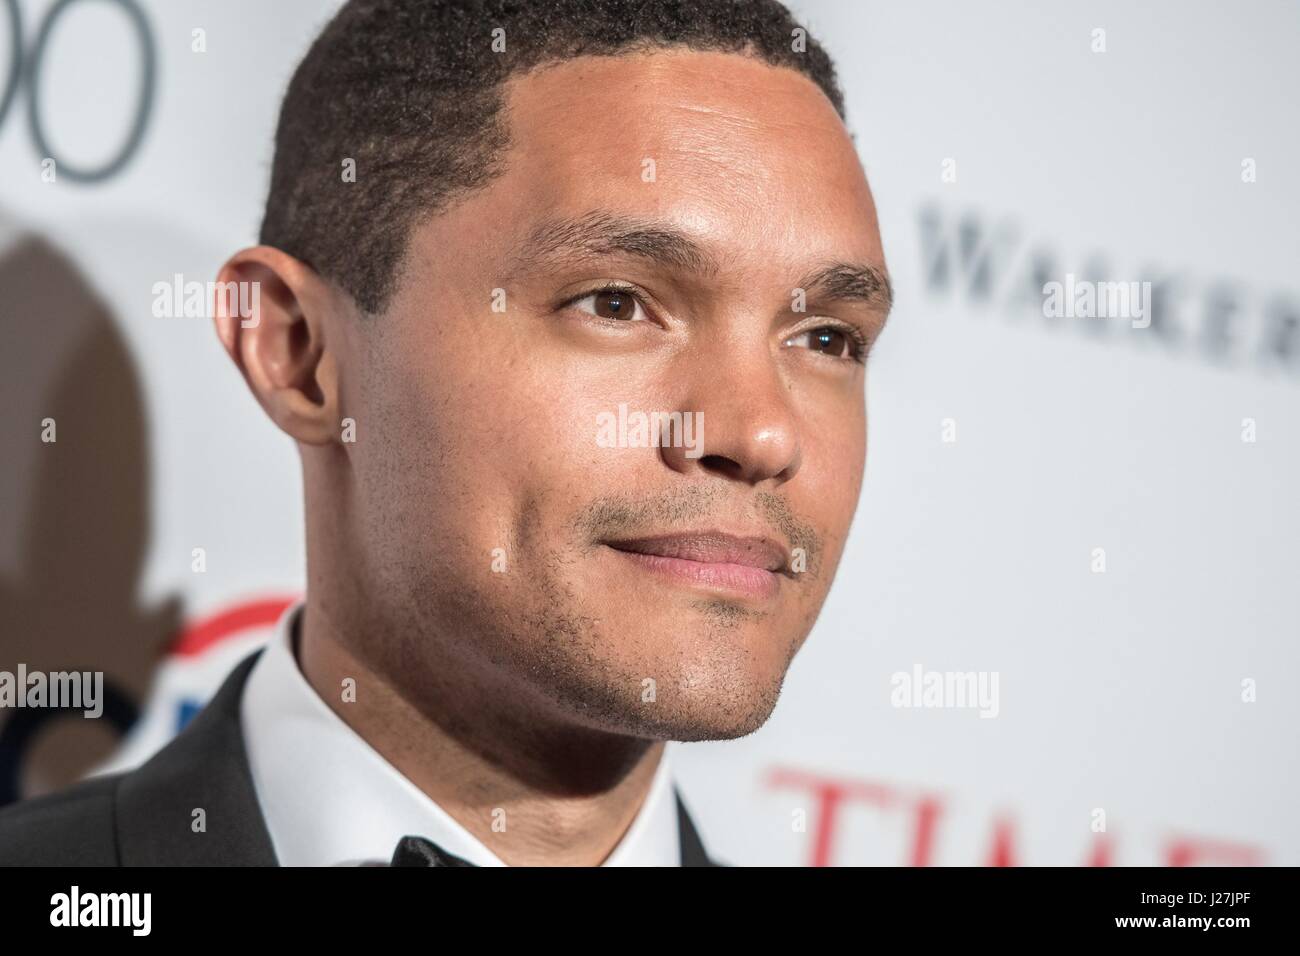 New York, NY, USA. 25th Apr, 2017. Trevor Noah at arrivals for TIME 100 Gala Dinner 2017, Jazz at Lincoln Center's Frederick P. Rose Hall, New York, NY April 25, 2017. Credit: Steven Ferdman/Everett Collection/Alamy Live News Stock Photo